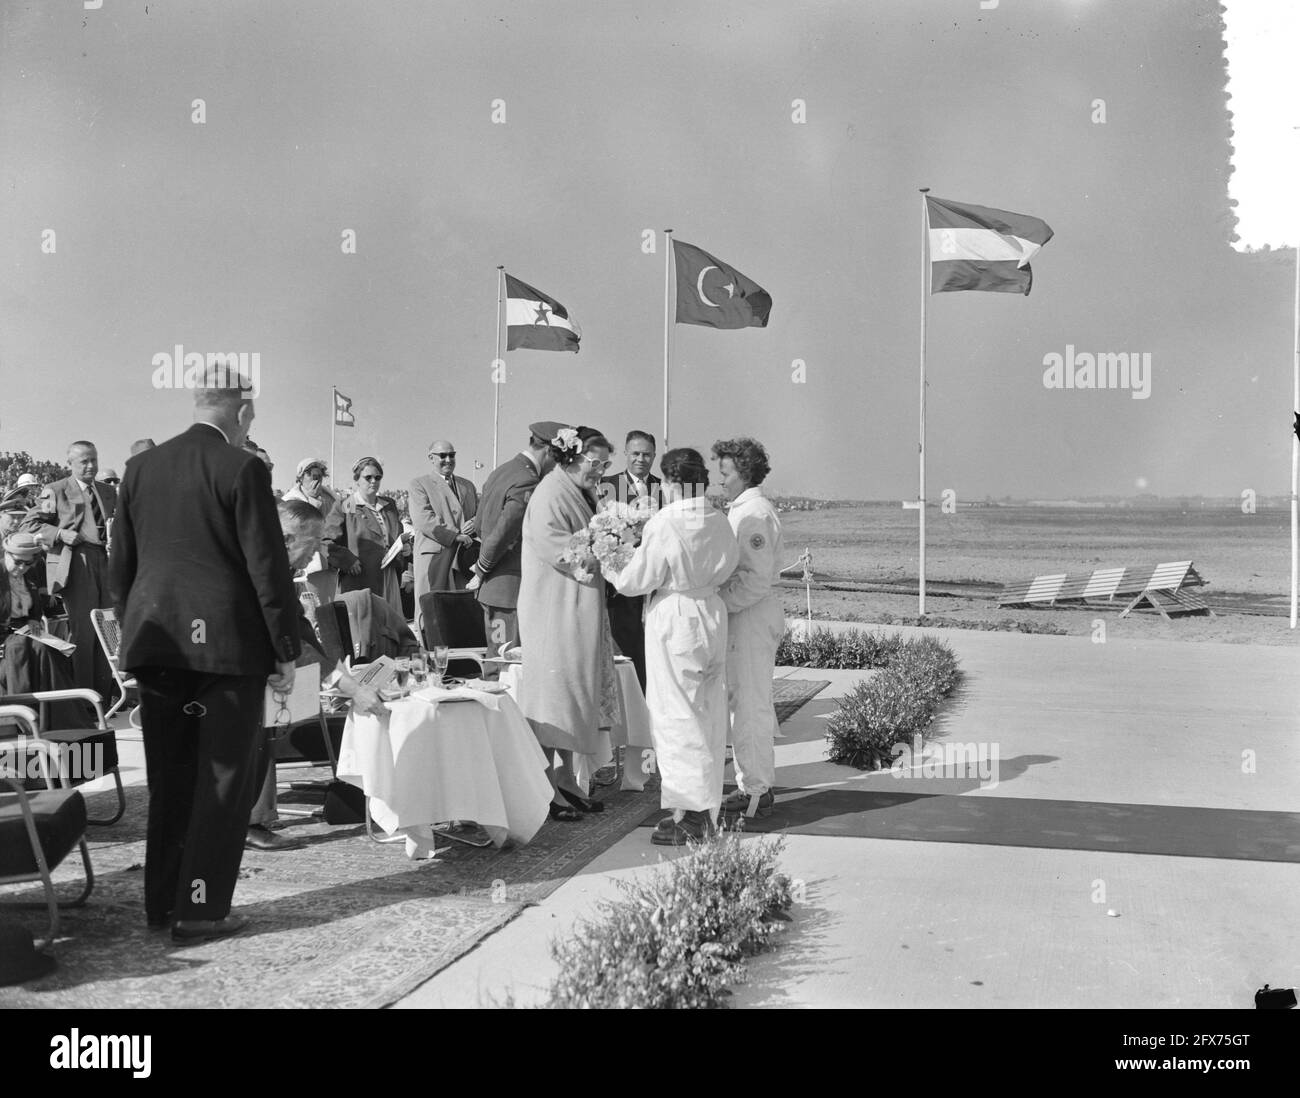 ILSY, the International AviationShow Ypenburg, in the presence of Queen Juliana. The queen is offered flowers by two female paratroopers, May 29, 1955, airports, The Netherlands, 20th century press agency photo, news to remember, documentary, historic photography 1945-1990, visual stories, human history of the Twentieth Century, capturing moments in time Stock Photo